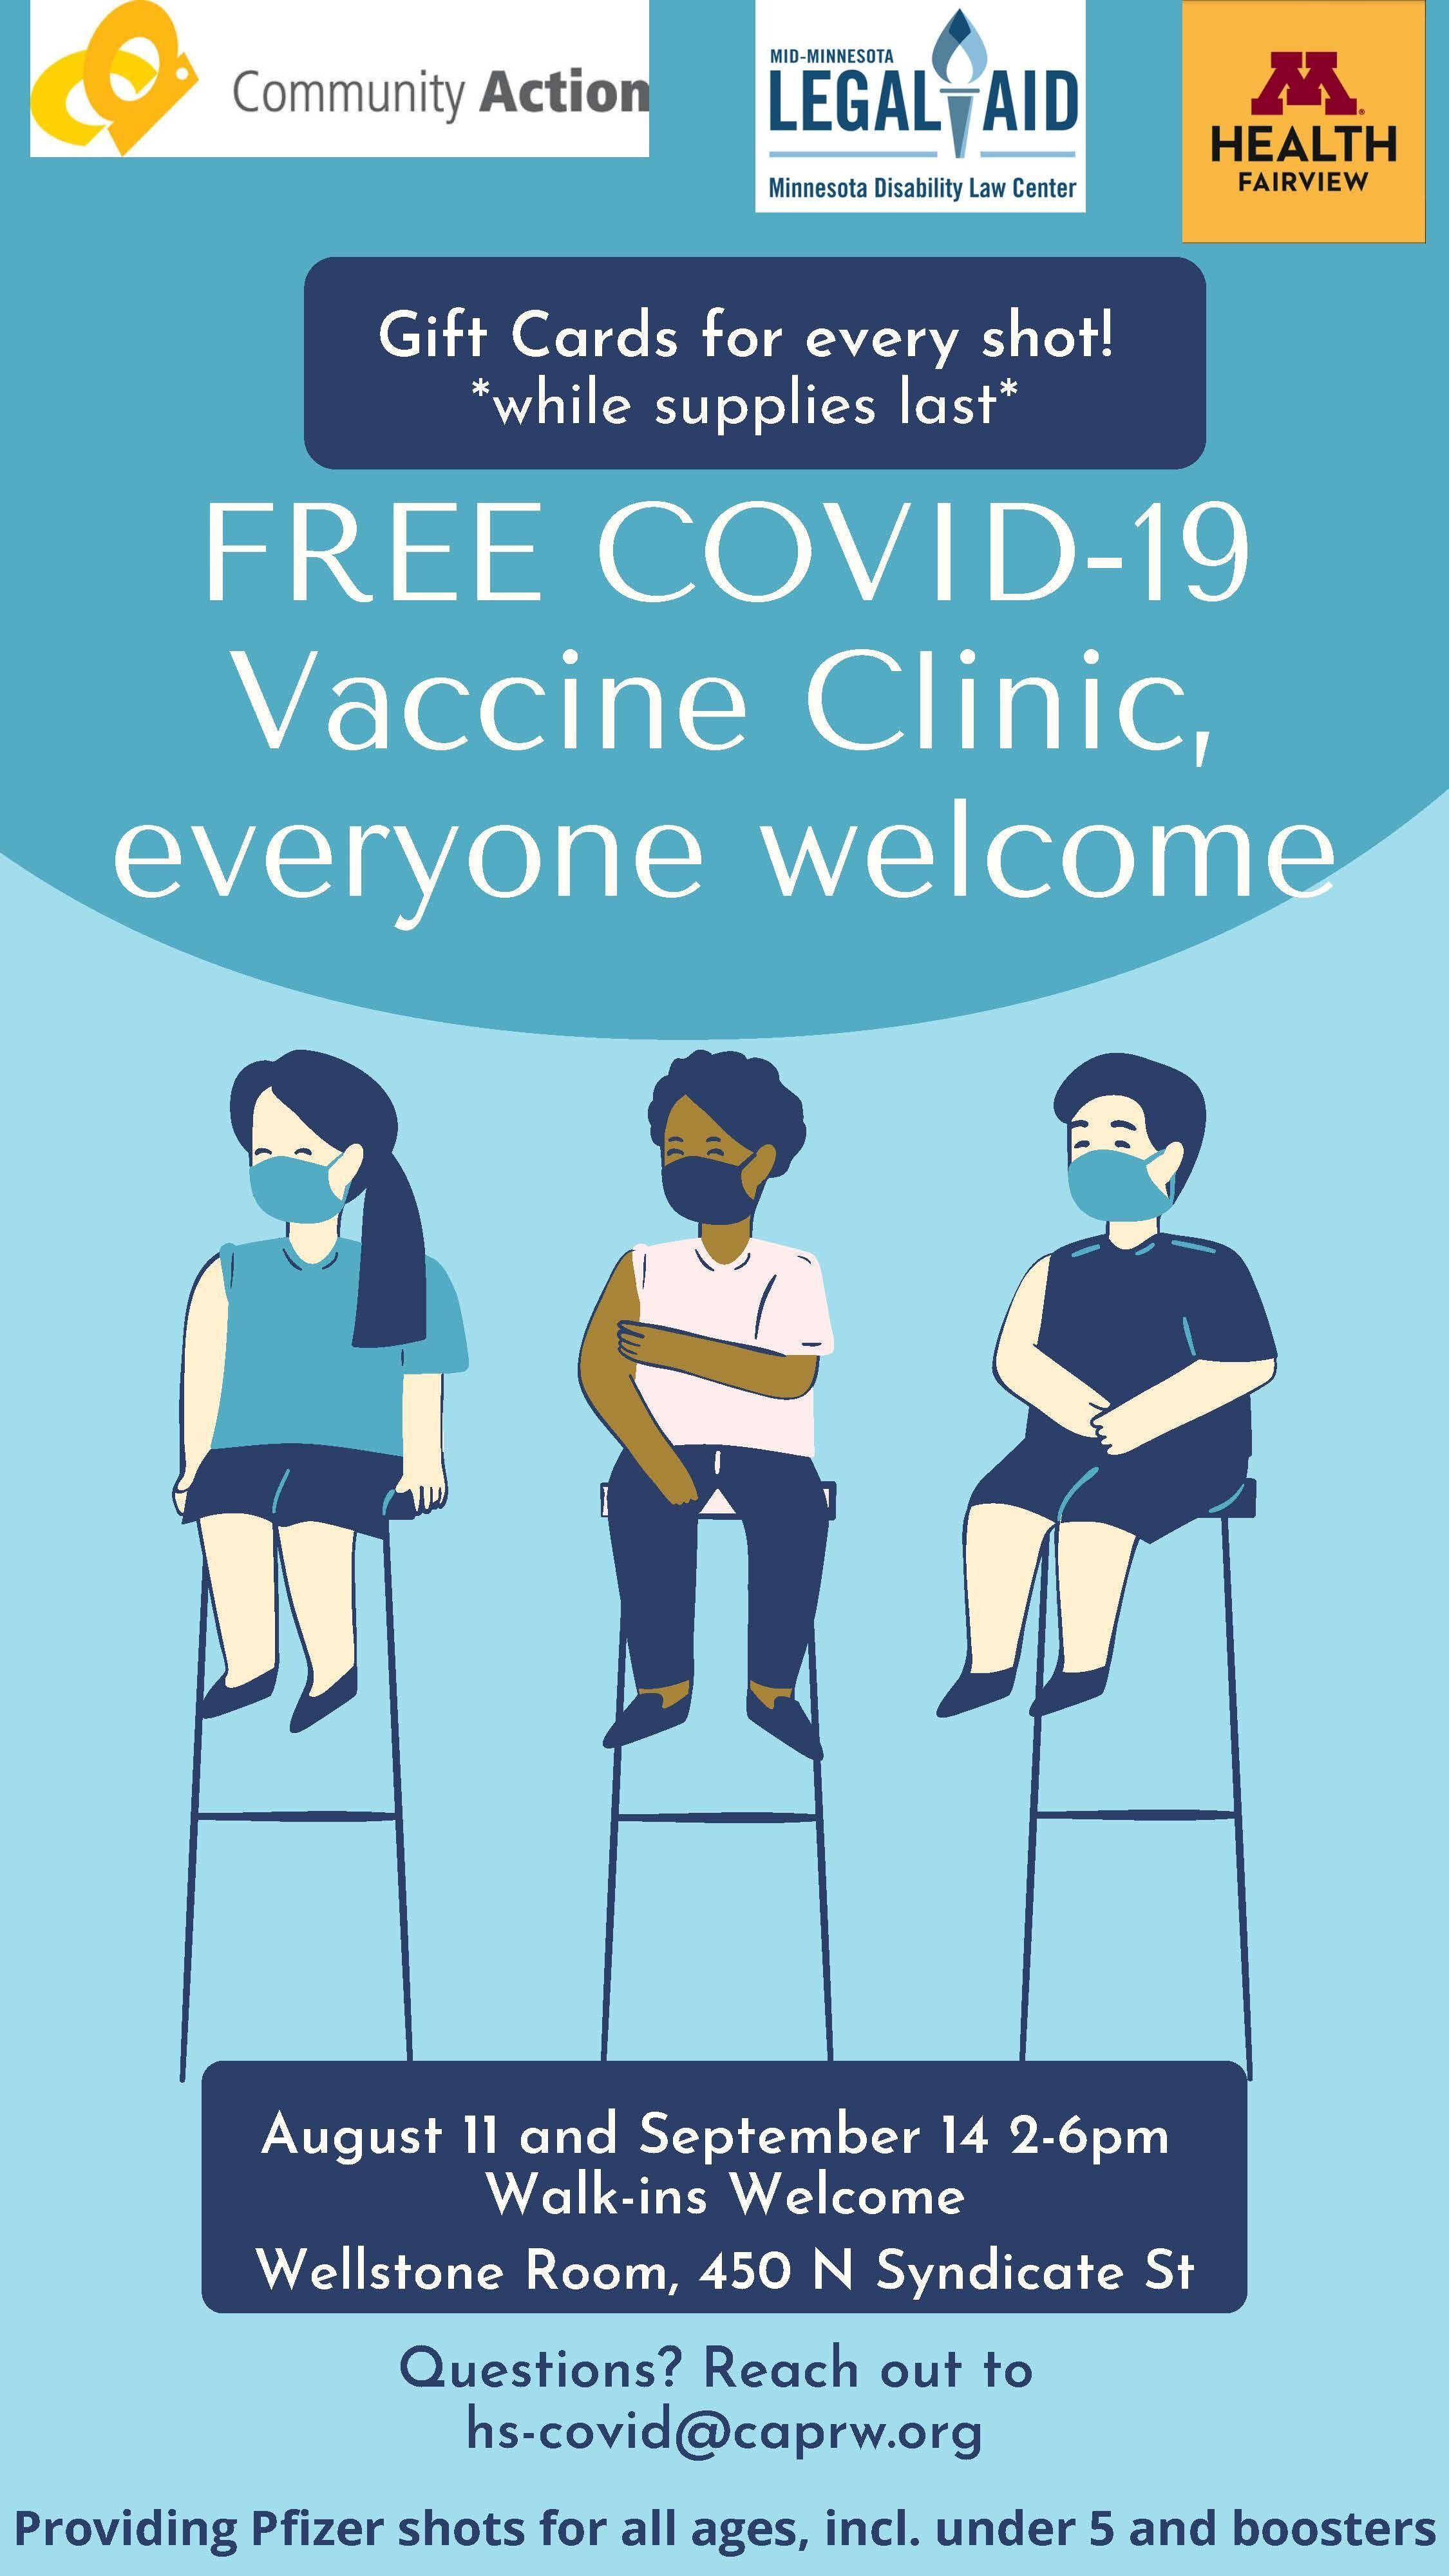 Community Action to Host Two More Free COVID-19 Vaccine Clinics